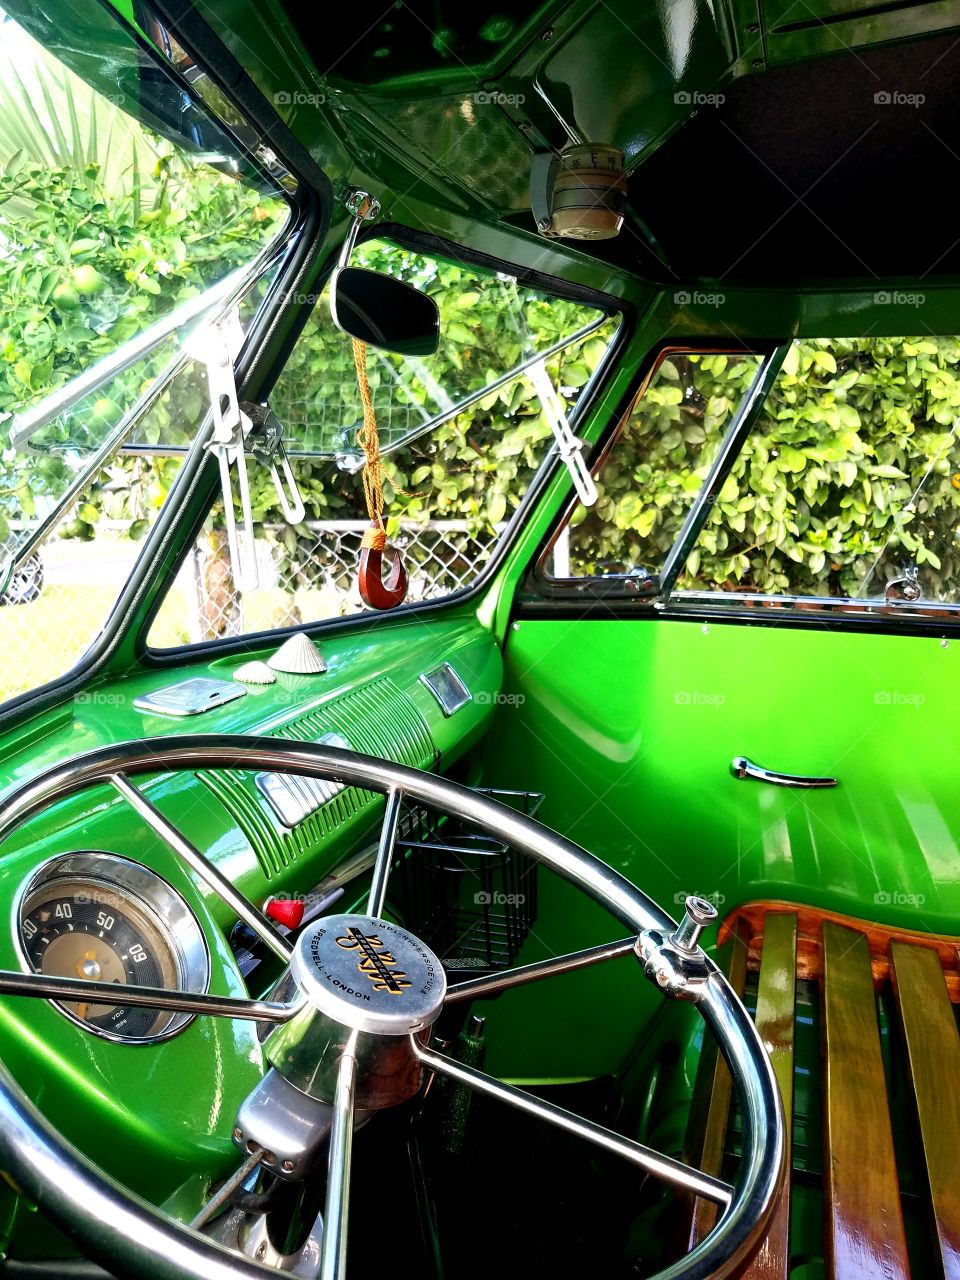 Volkswagon pick up truck with a quick glimpse inside. Restored with Hawaii's infamous Koa tree